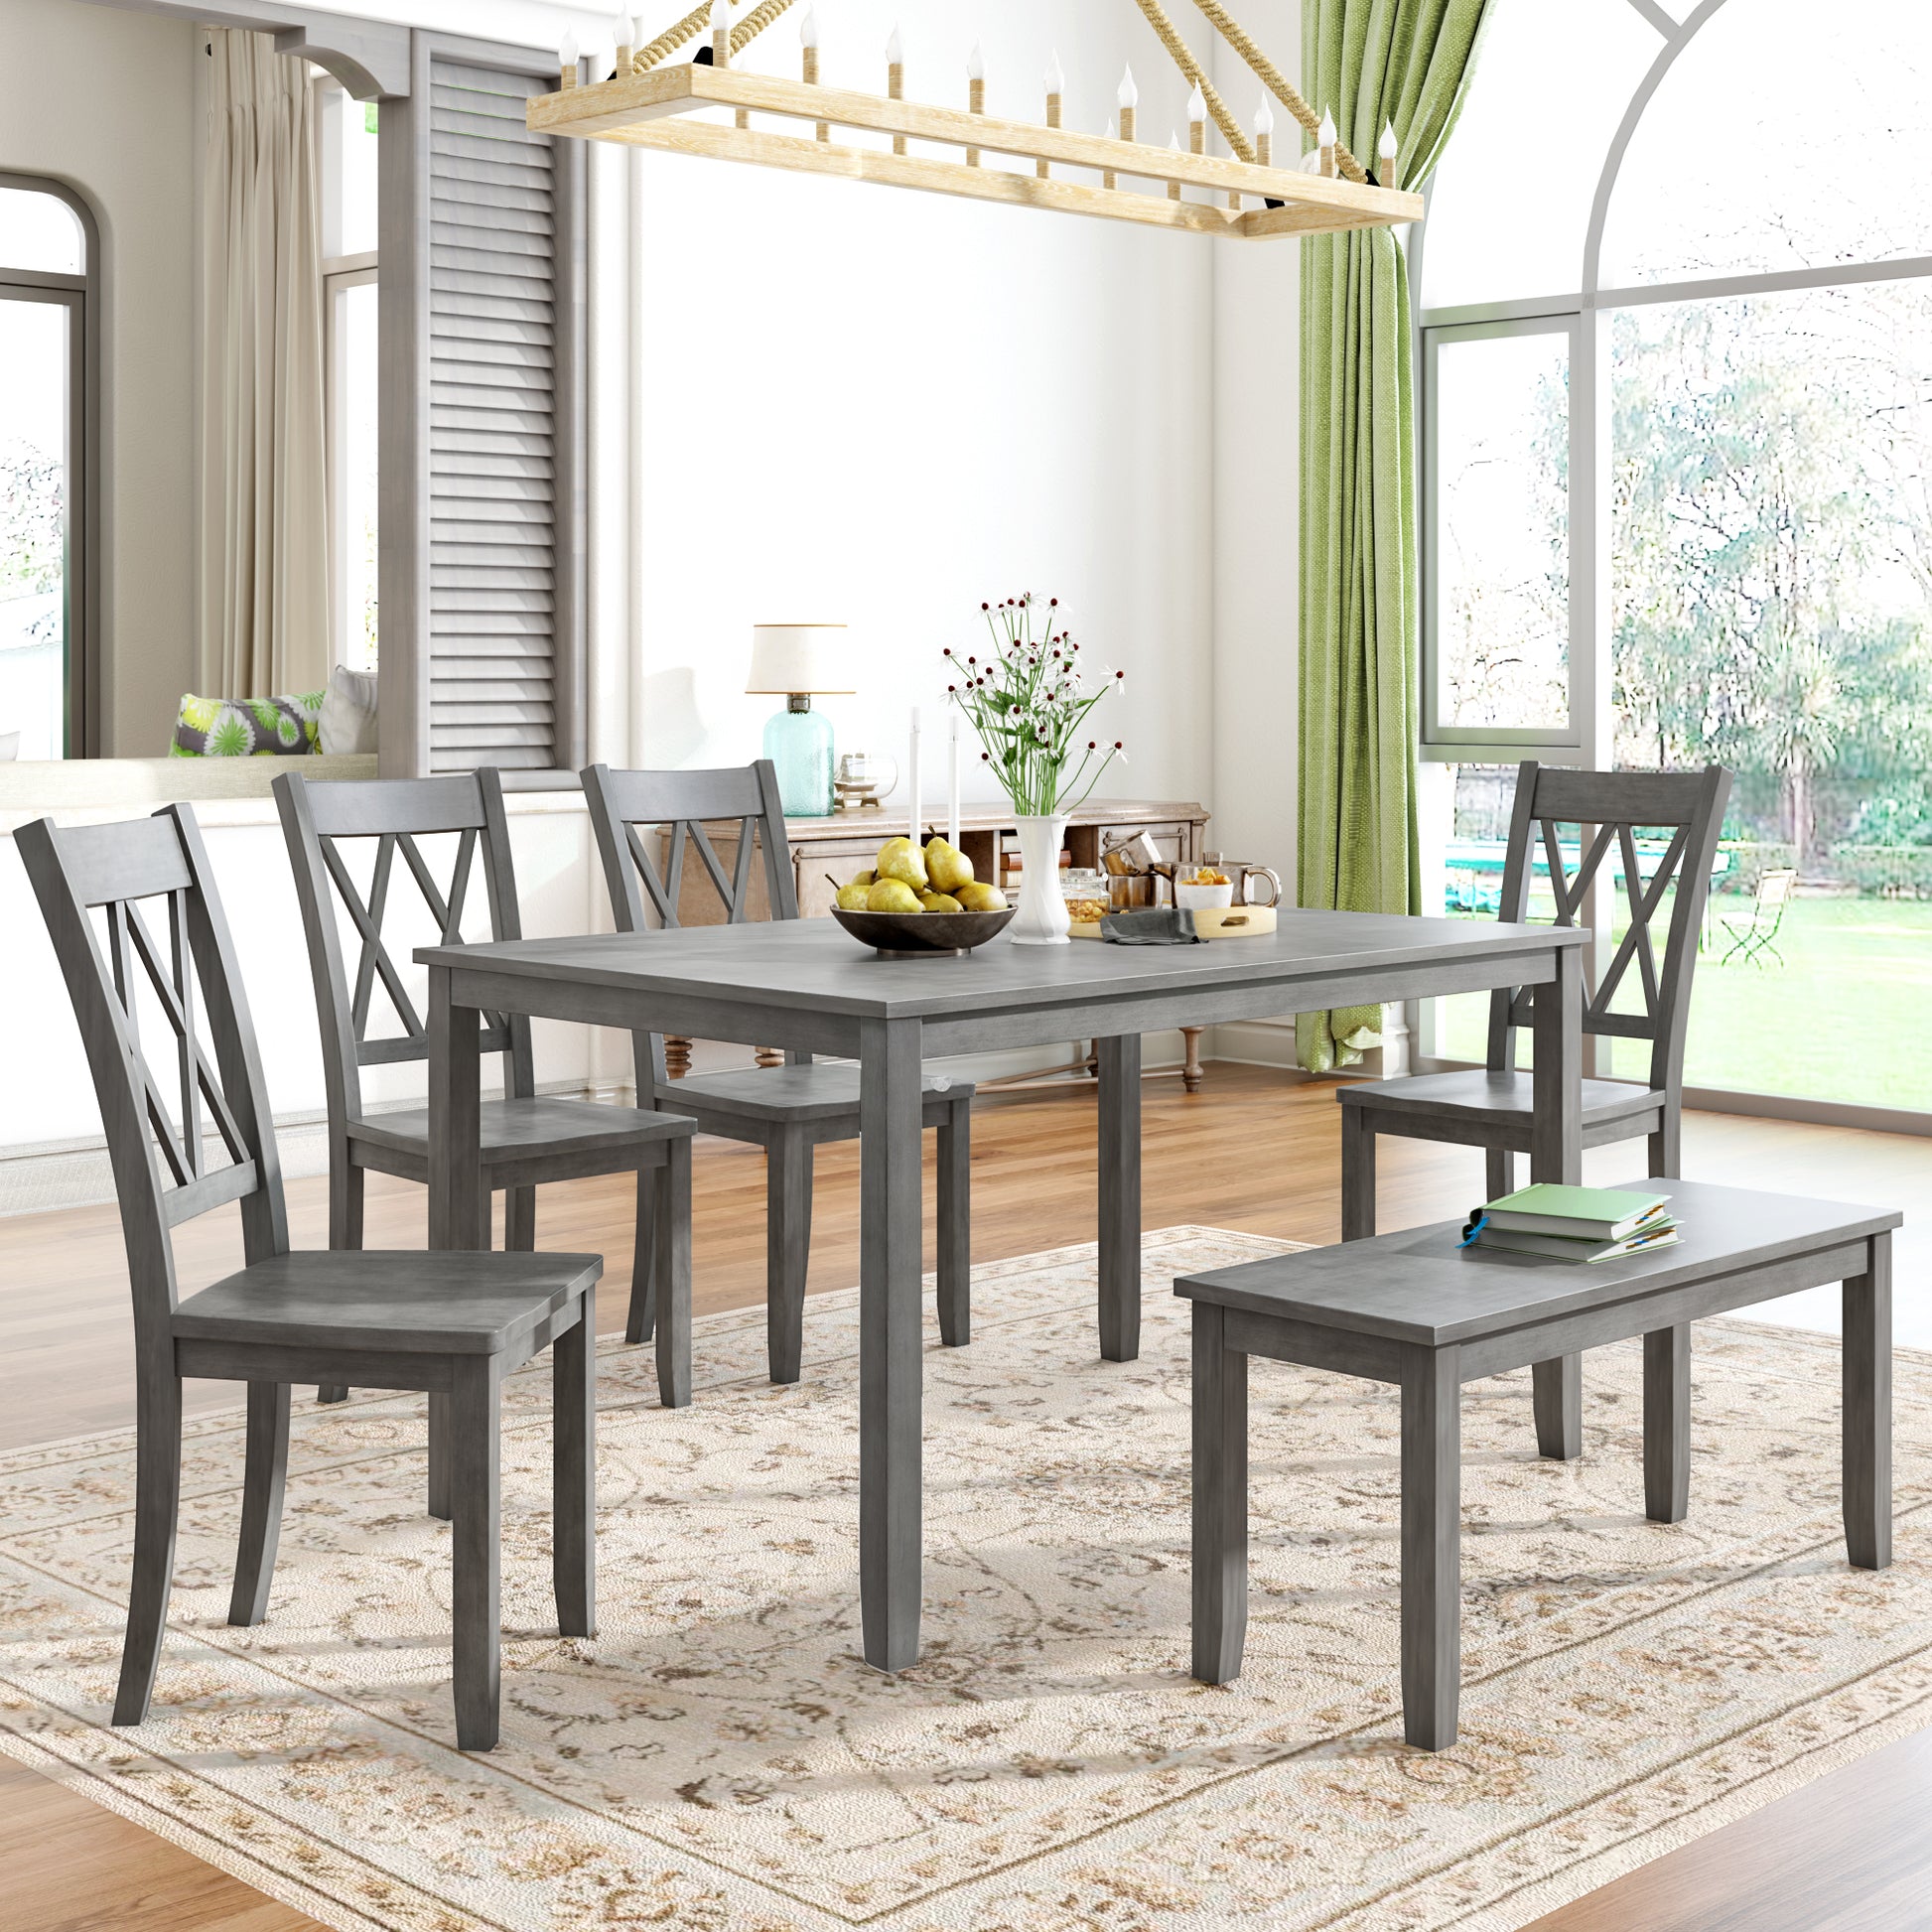 TOPMAX 6-piece Wooden Kitchen Table Set in Antique Gray